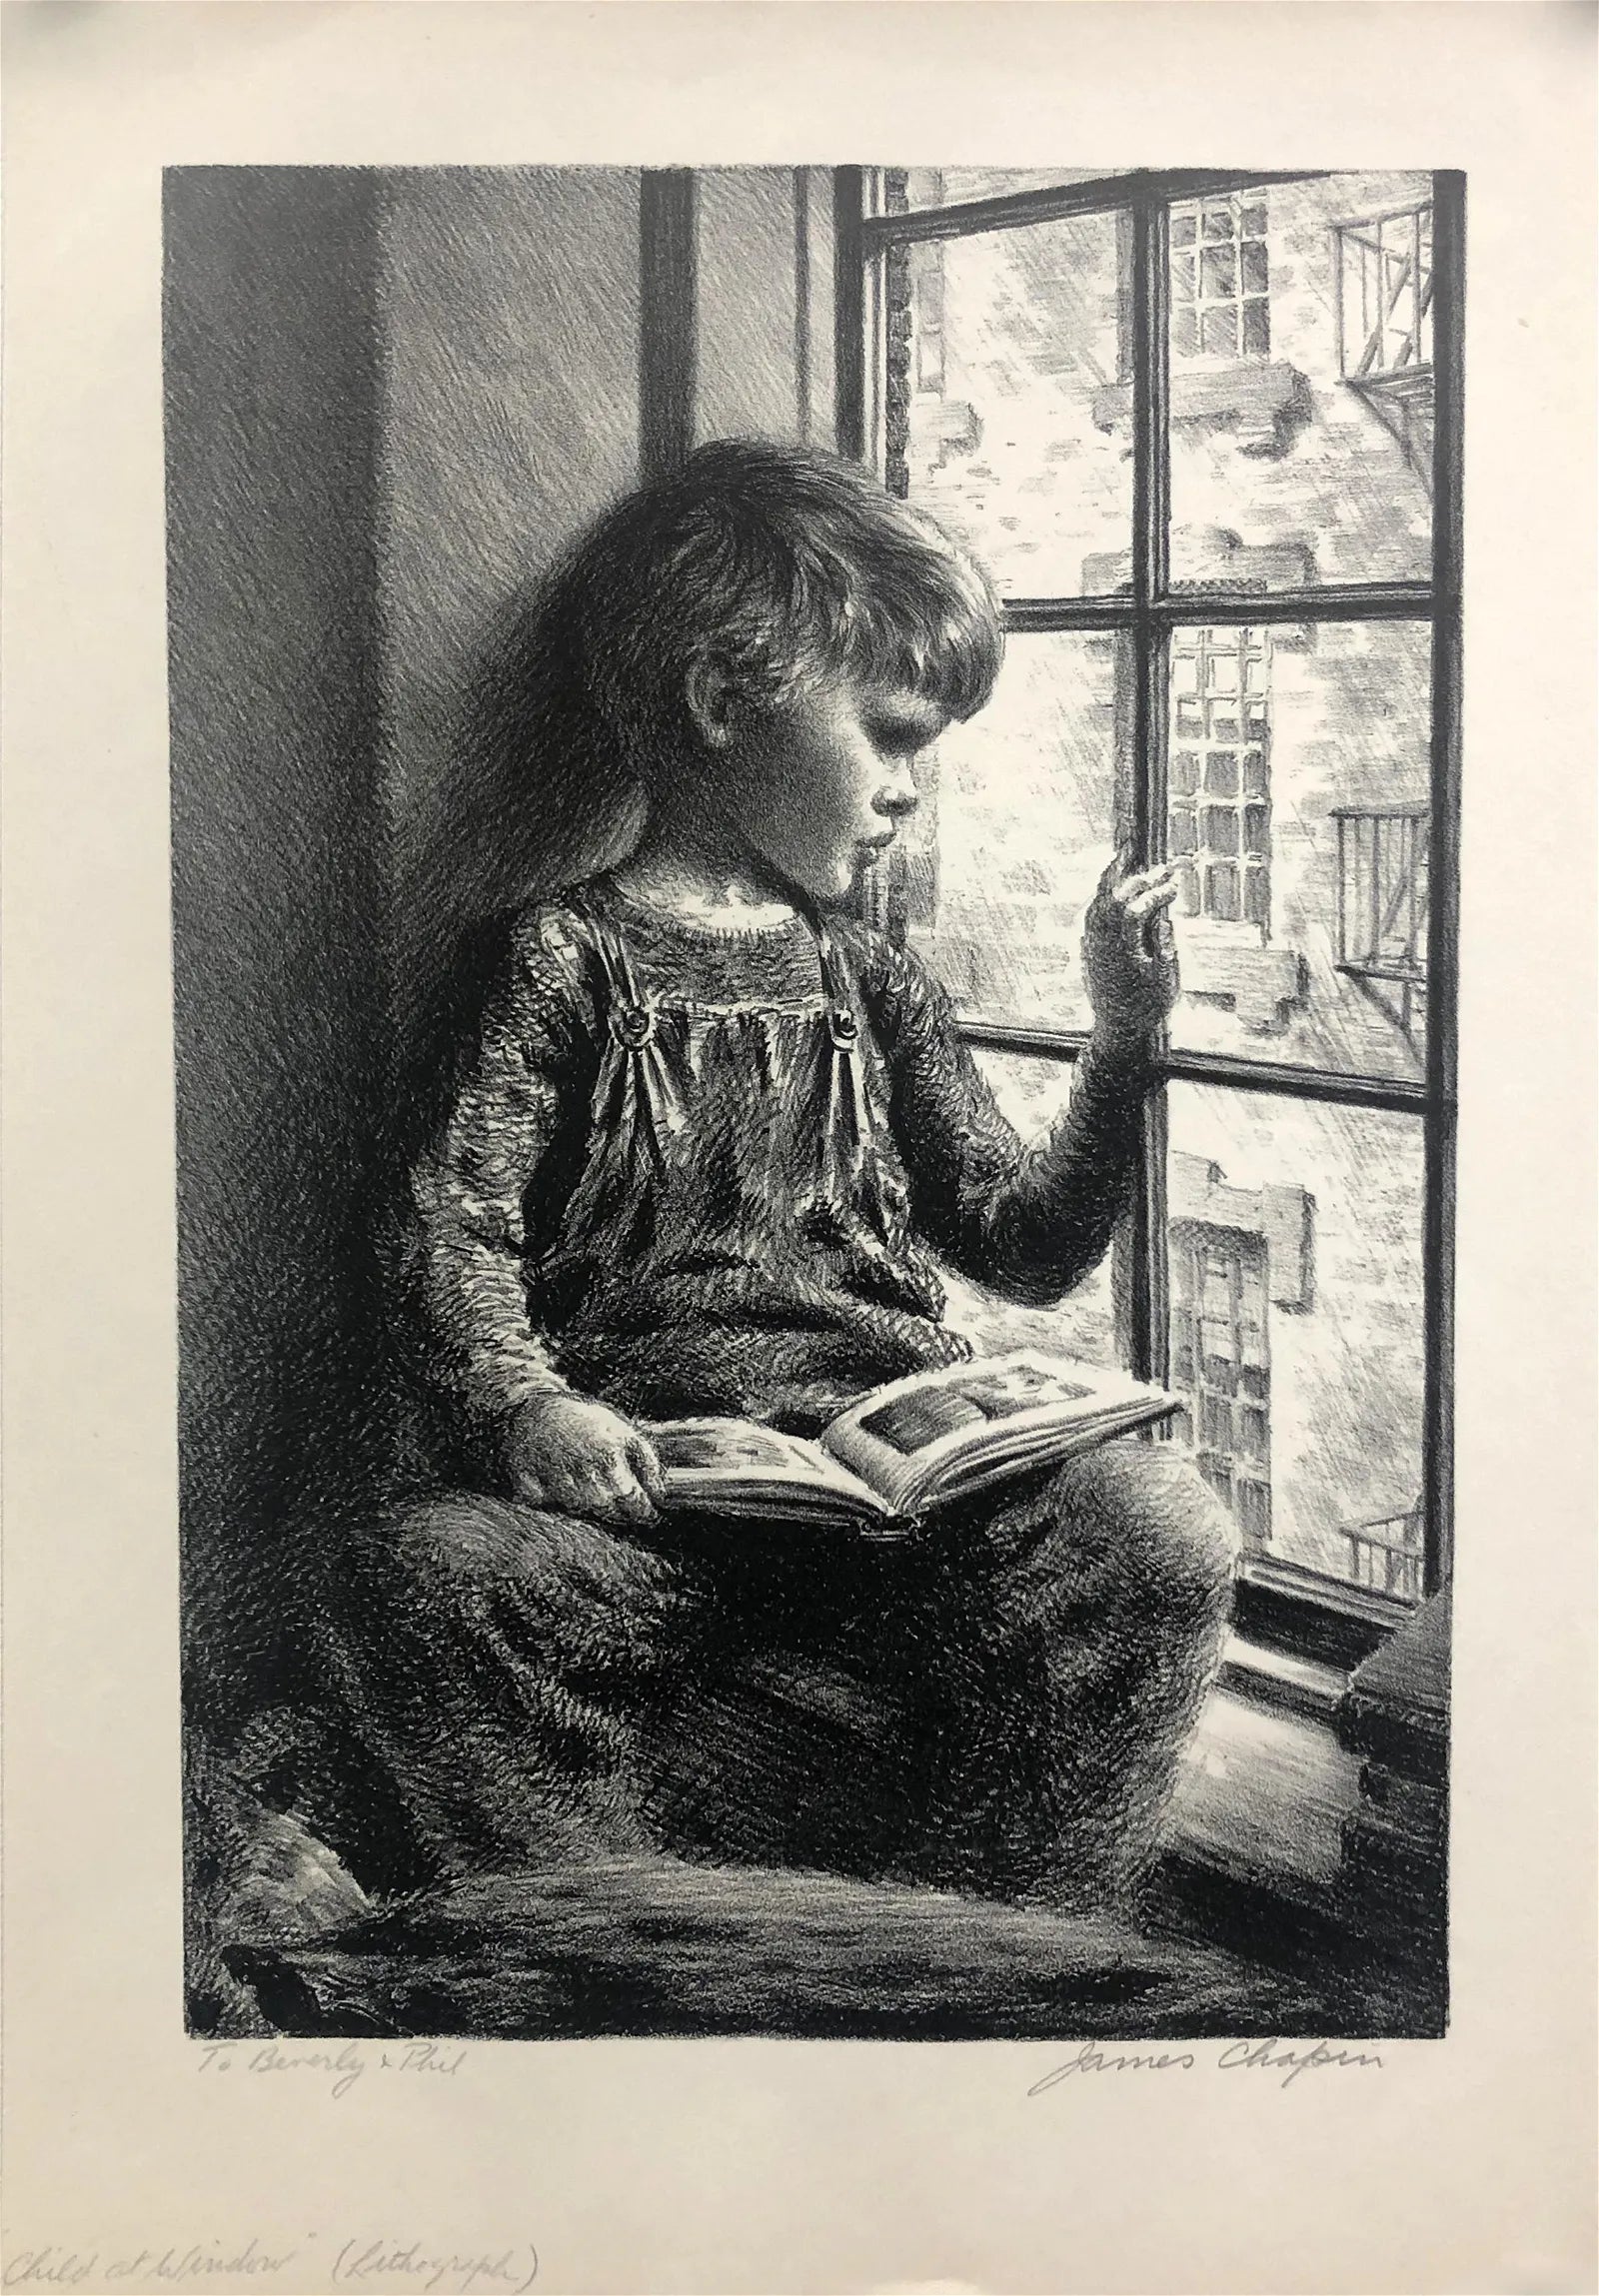 AW8-010: James Ormsbee Chapin - Circa 1943 - Lithograph - "Child at Window"